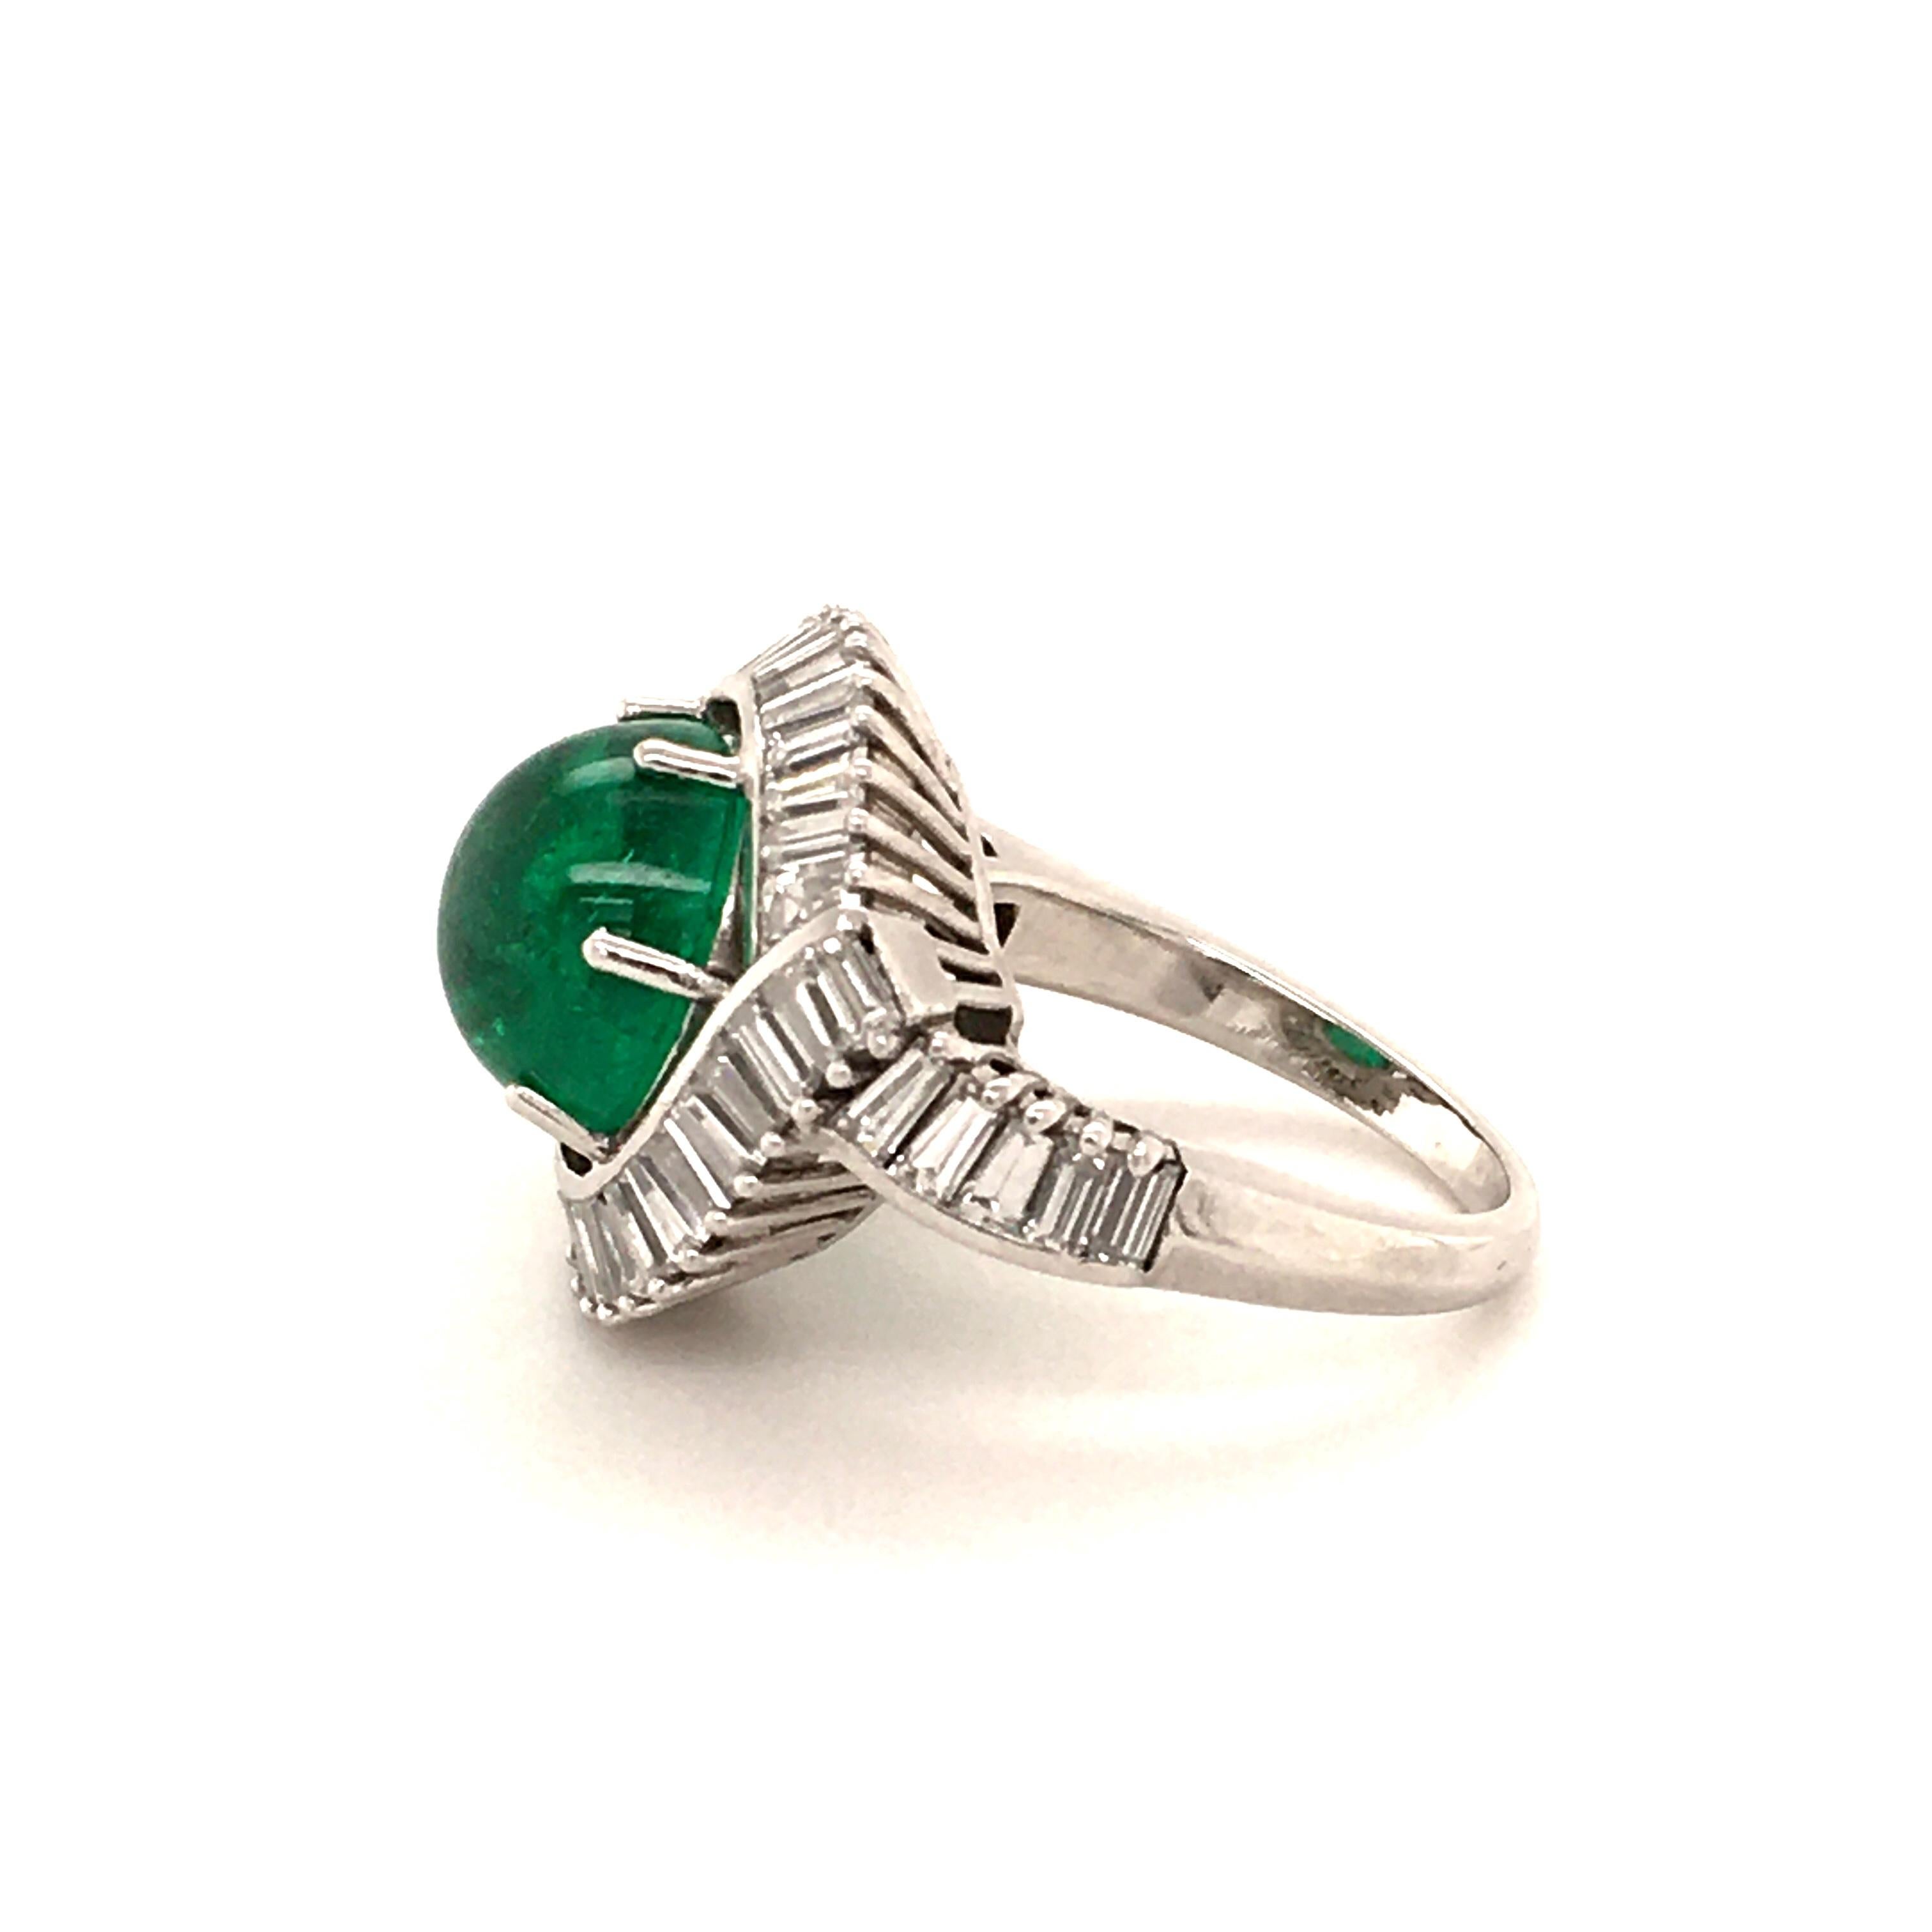 Cabochon 5.69 Carat Colombian Emerald and Diamond Ring in Platinum 950 For Sale